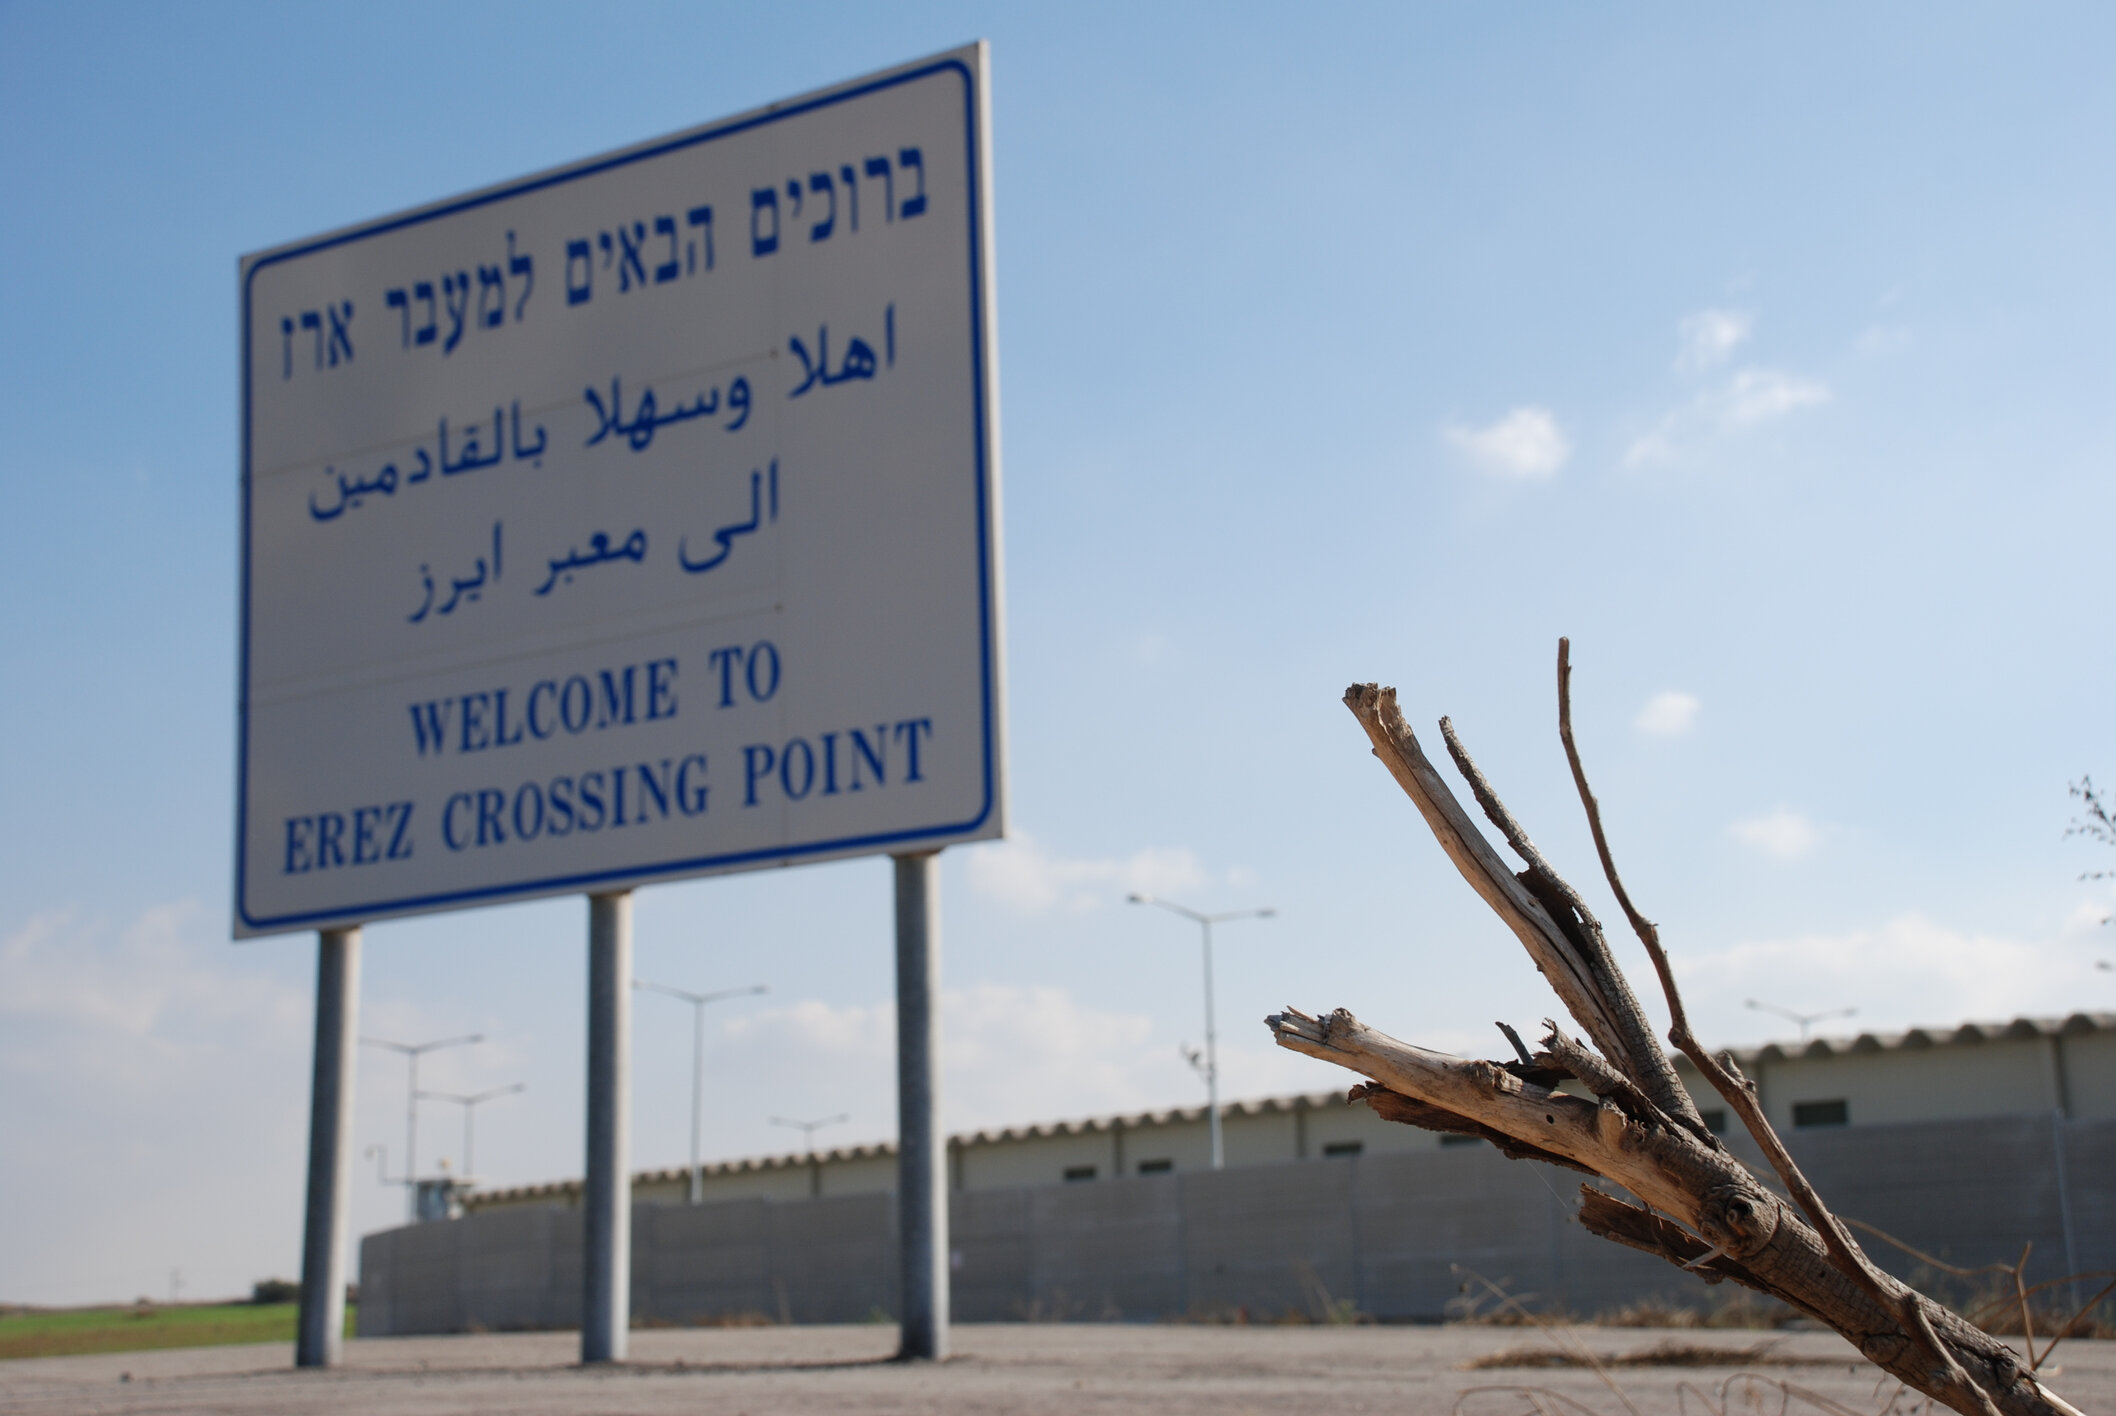 The border at Erez (photo Getty Images).